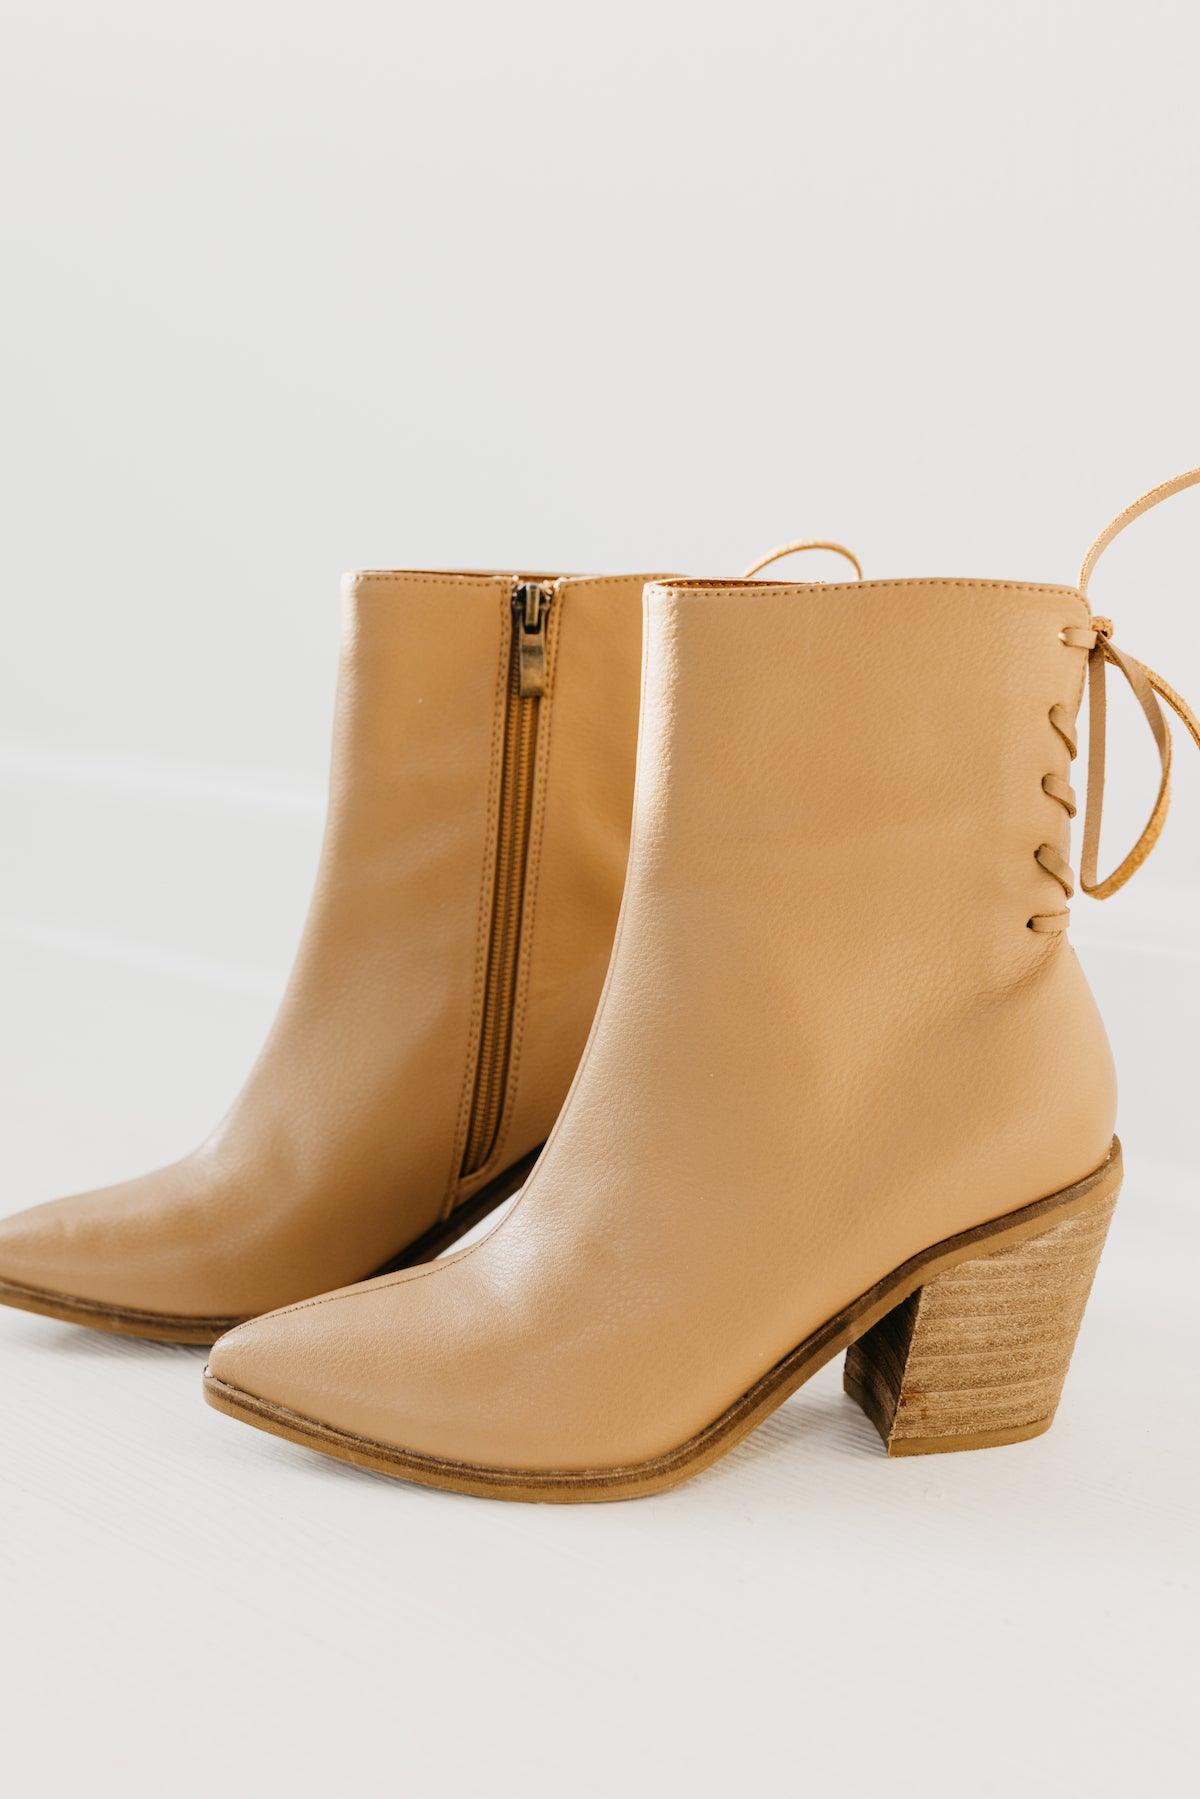 The Aster Lace Up Bootie  - FINAL SALE